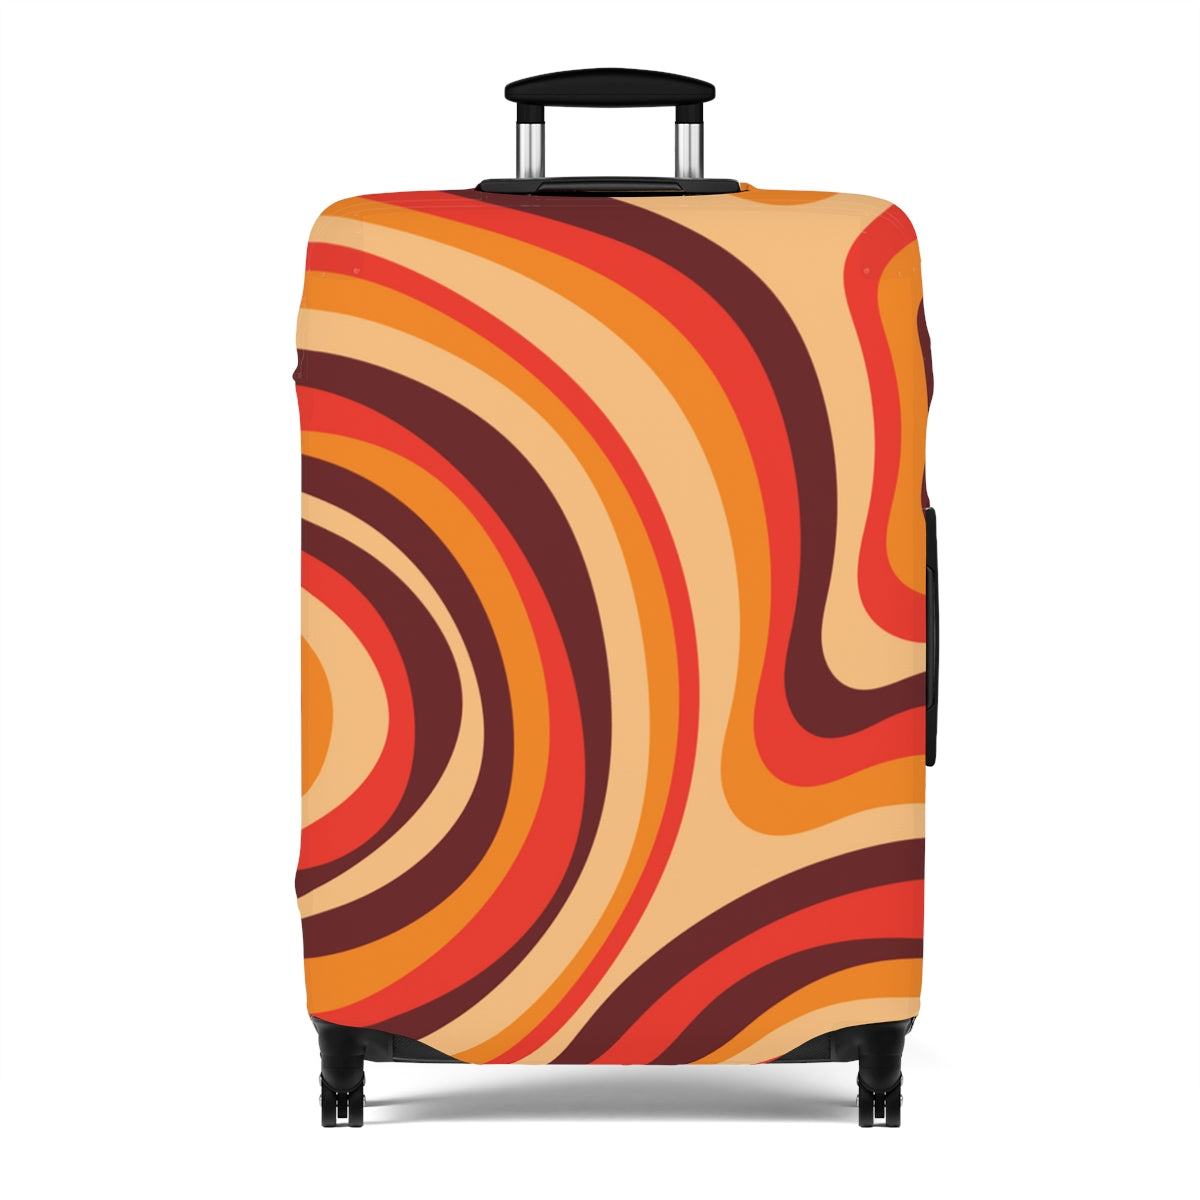 Retro Luggage Cover, Vintage Mid Modern 70s Brown Orange Suitcase Protector Hard Carry On Bag Washable Large Small Aesthetic Starcove Fashion